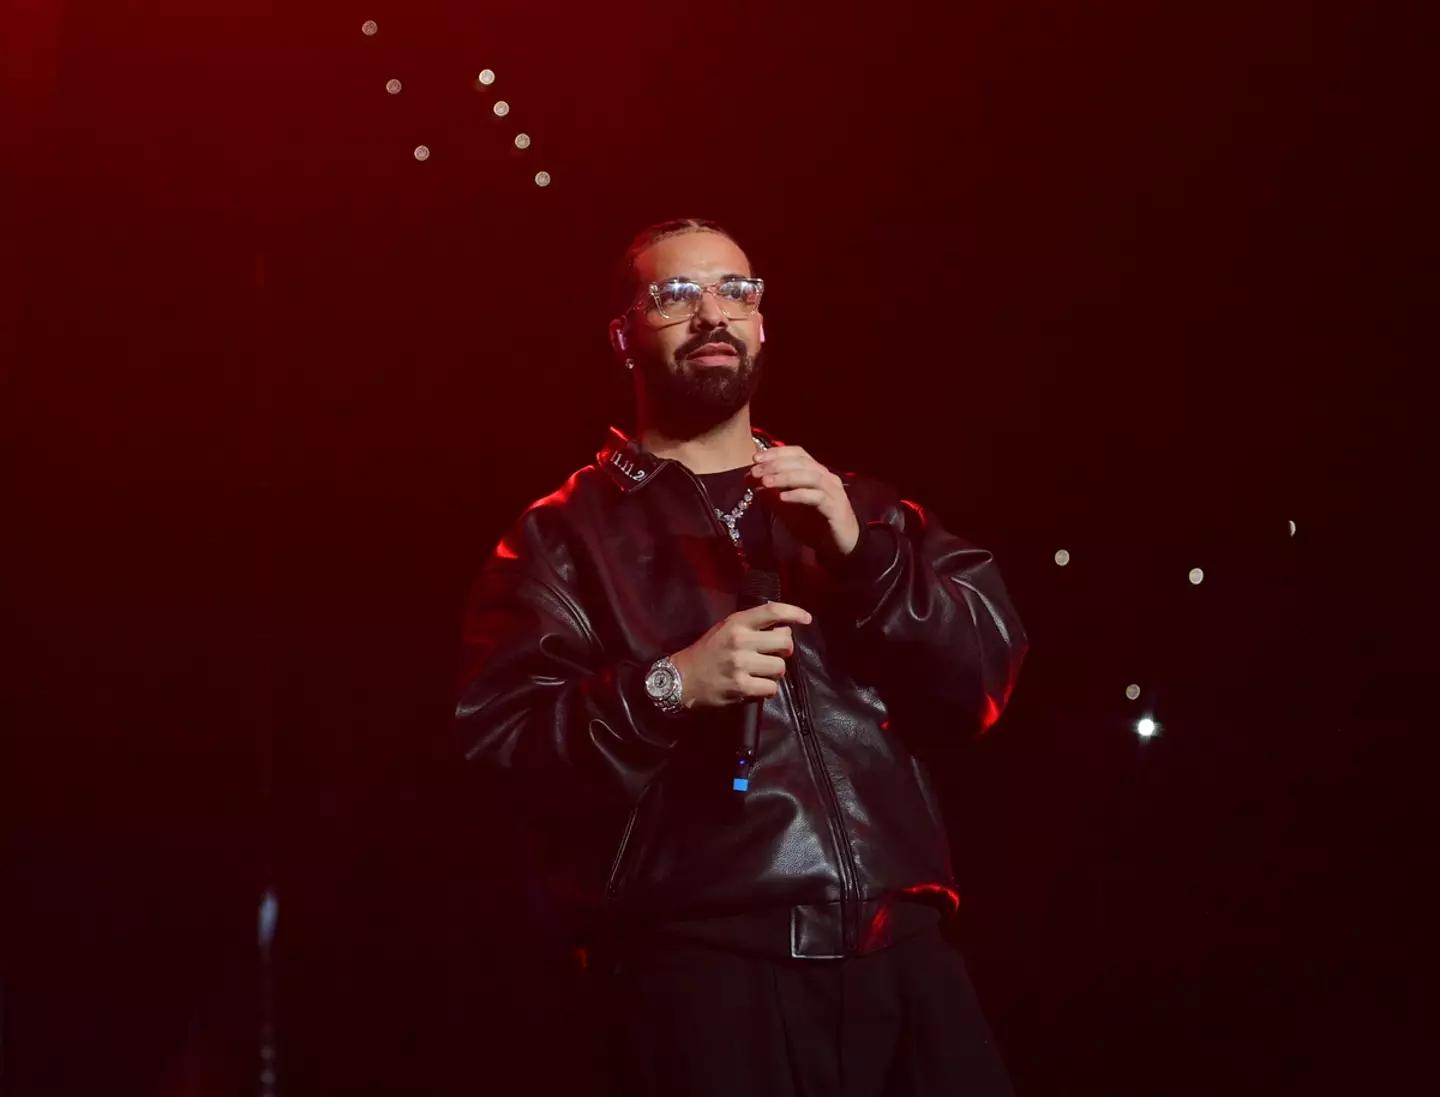 Drake admits to featuring in a leaked X-rated video. Prince Williams/Wireimage